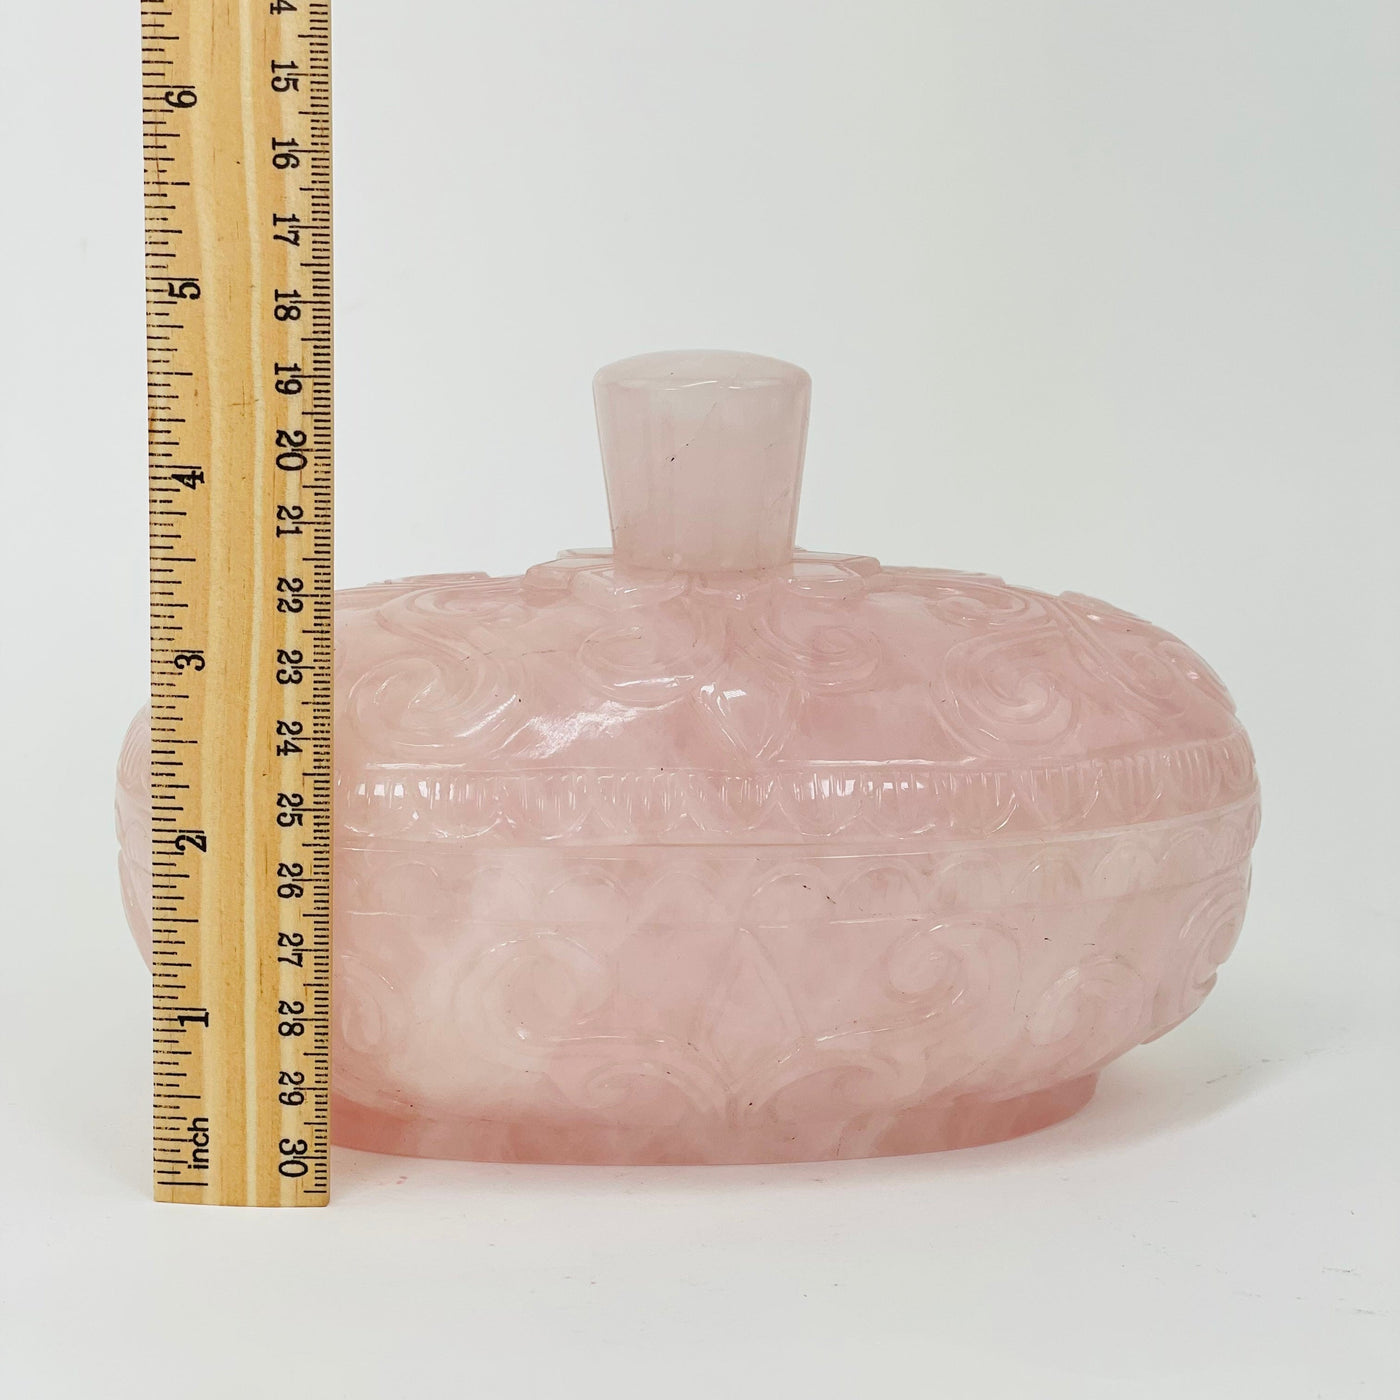 rose quartz bowl next to a ruler for size reference 